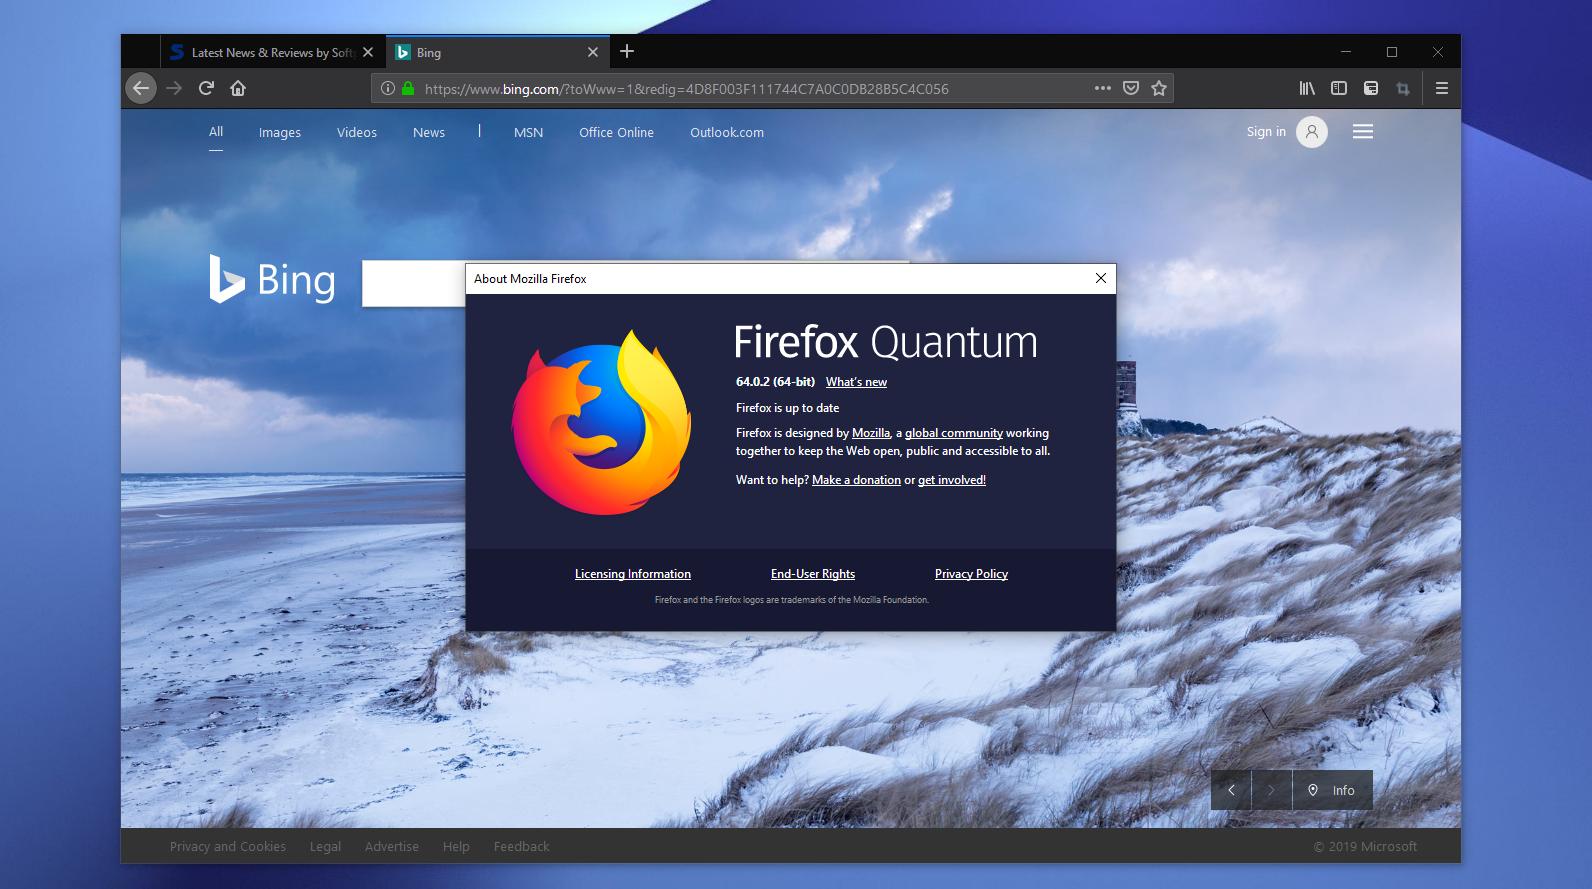 adobe flash player for firefox plugin download